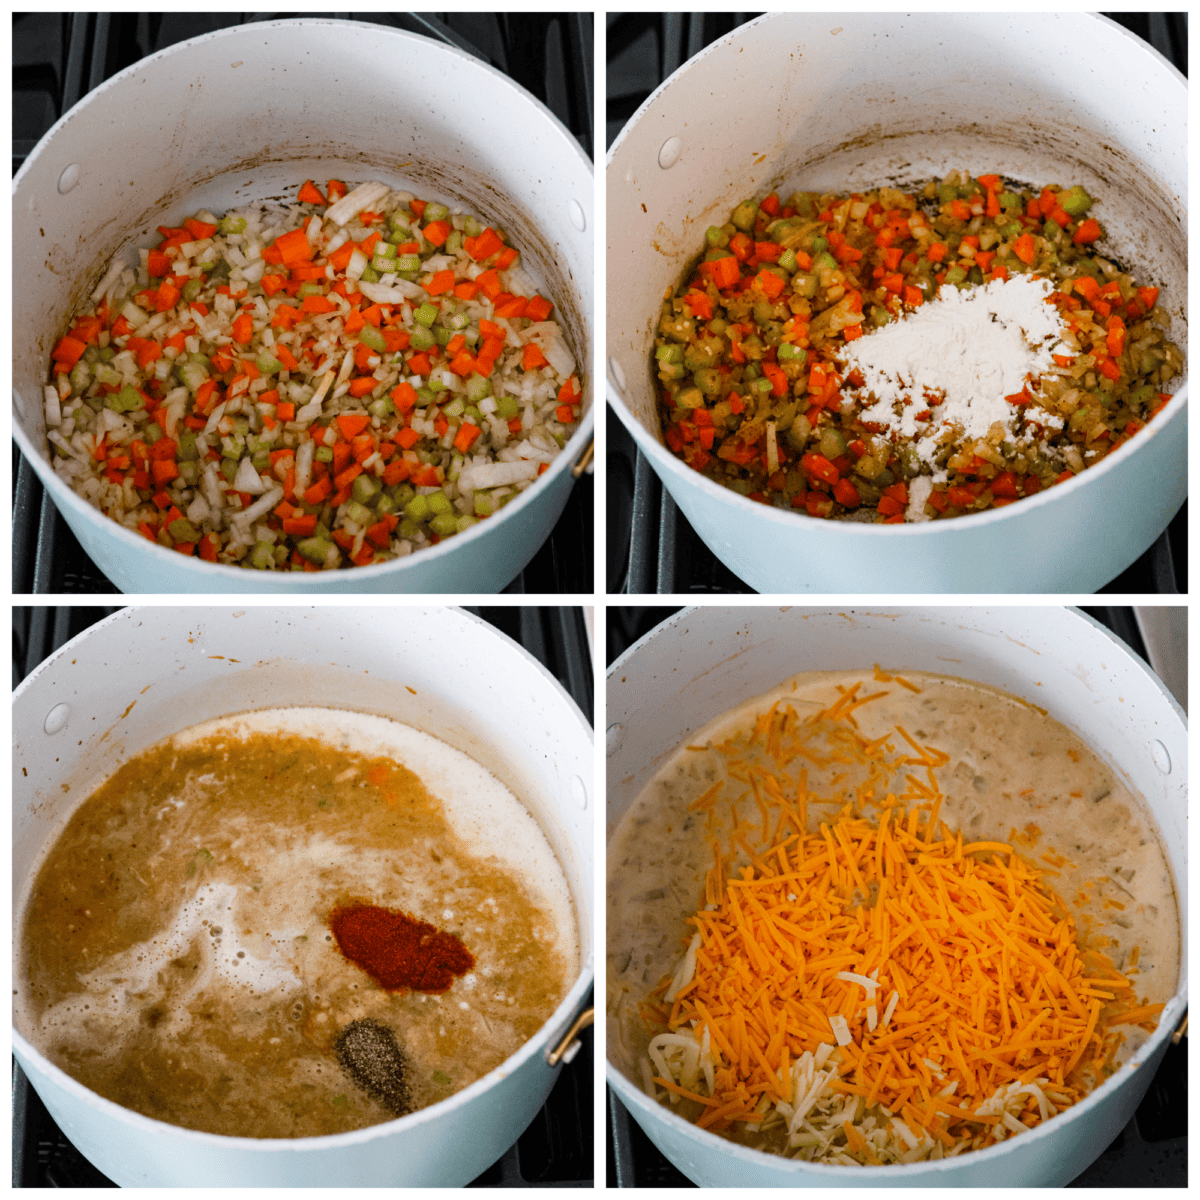 4-photo collage of the soup being prepared on the stove.